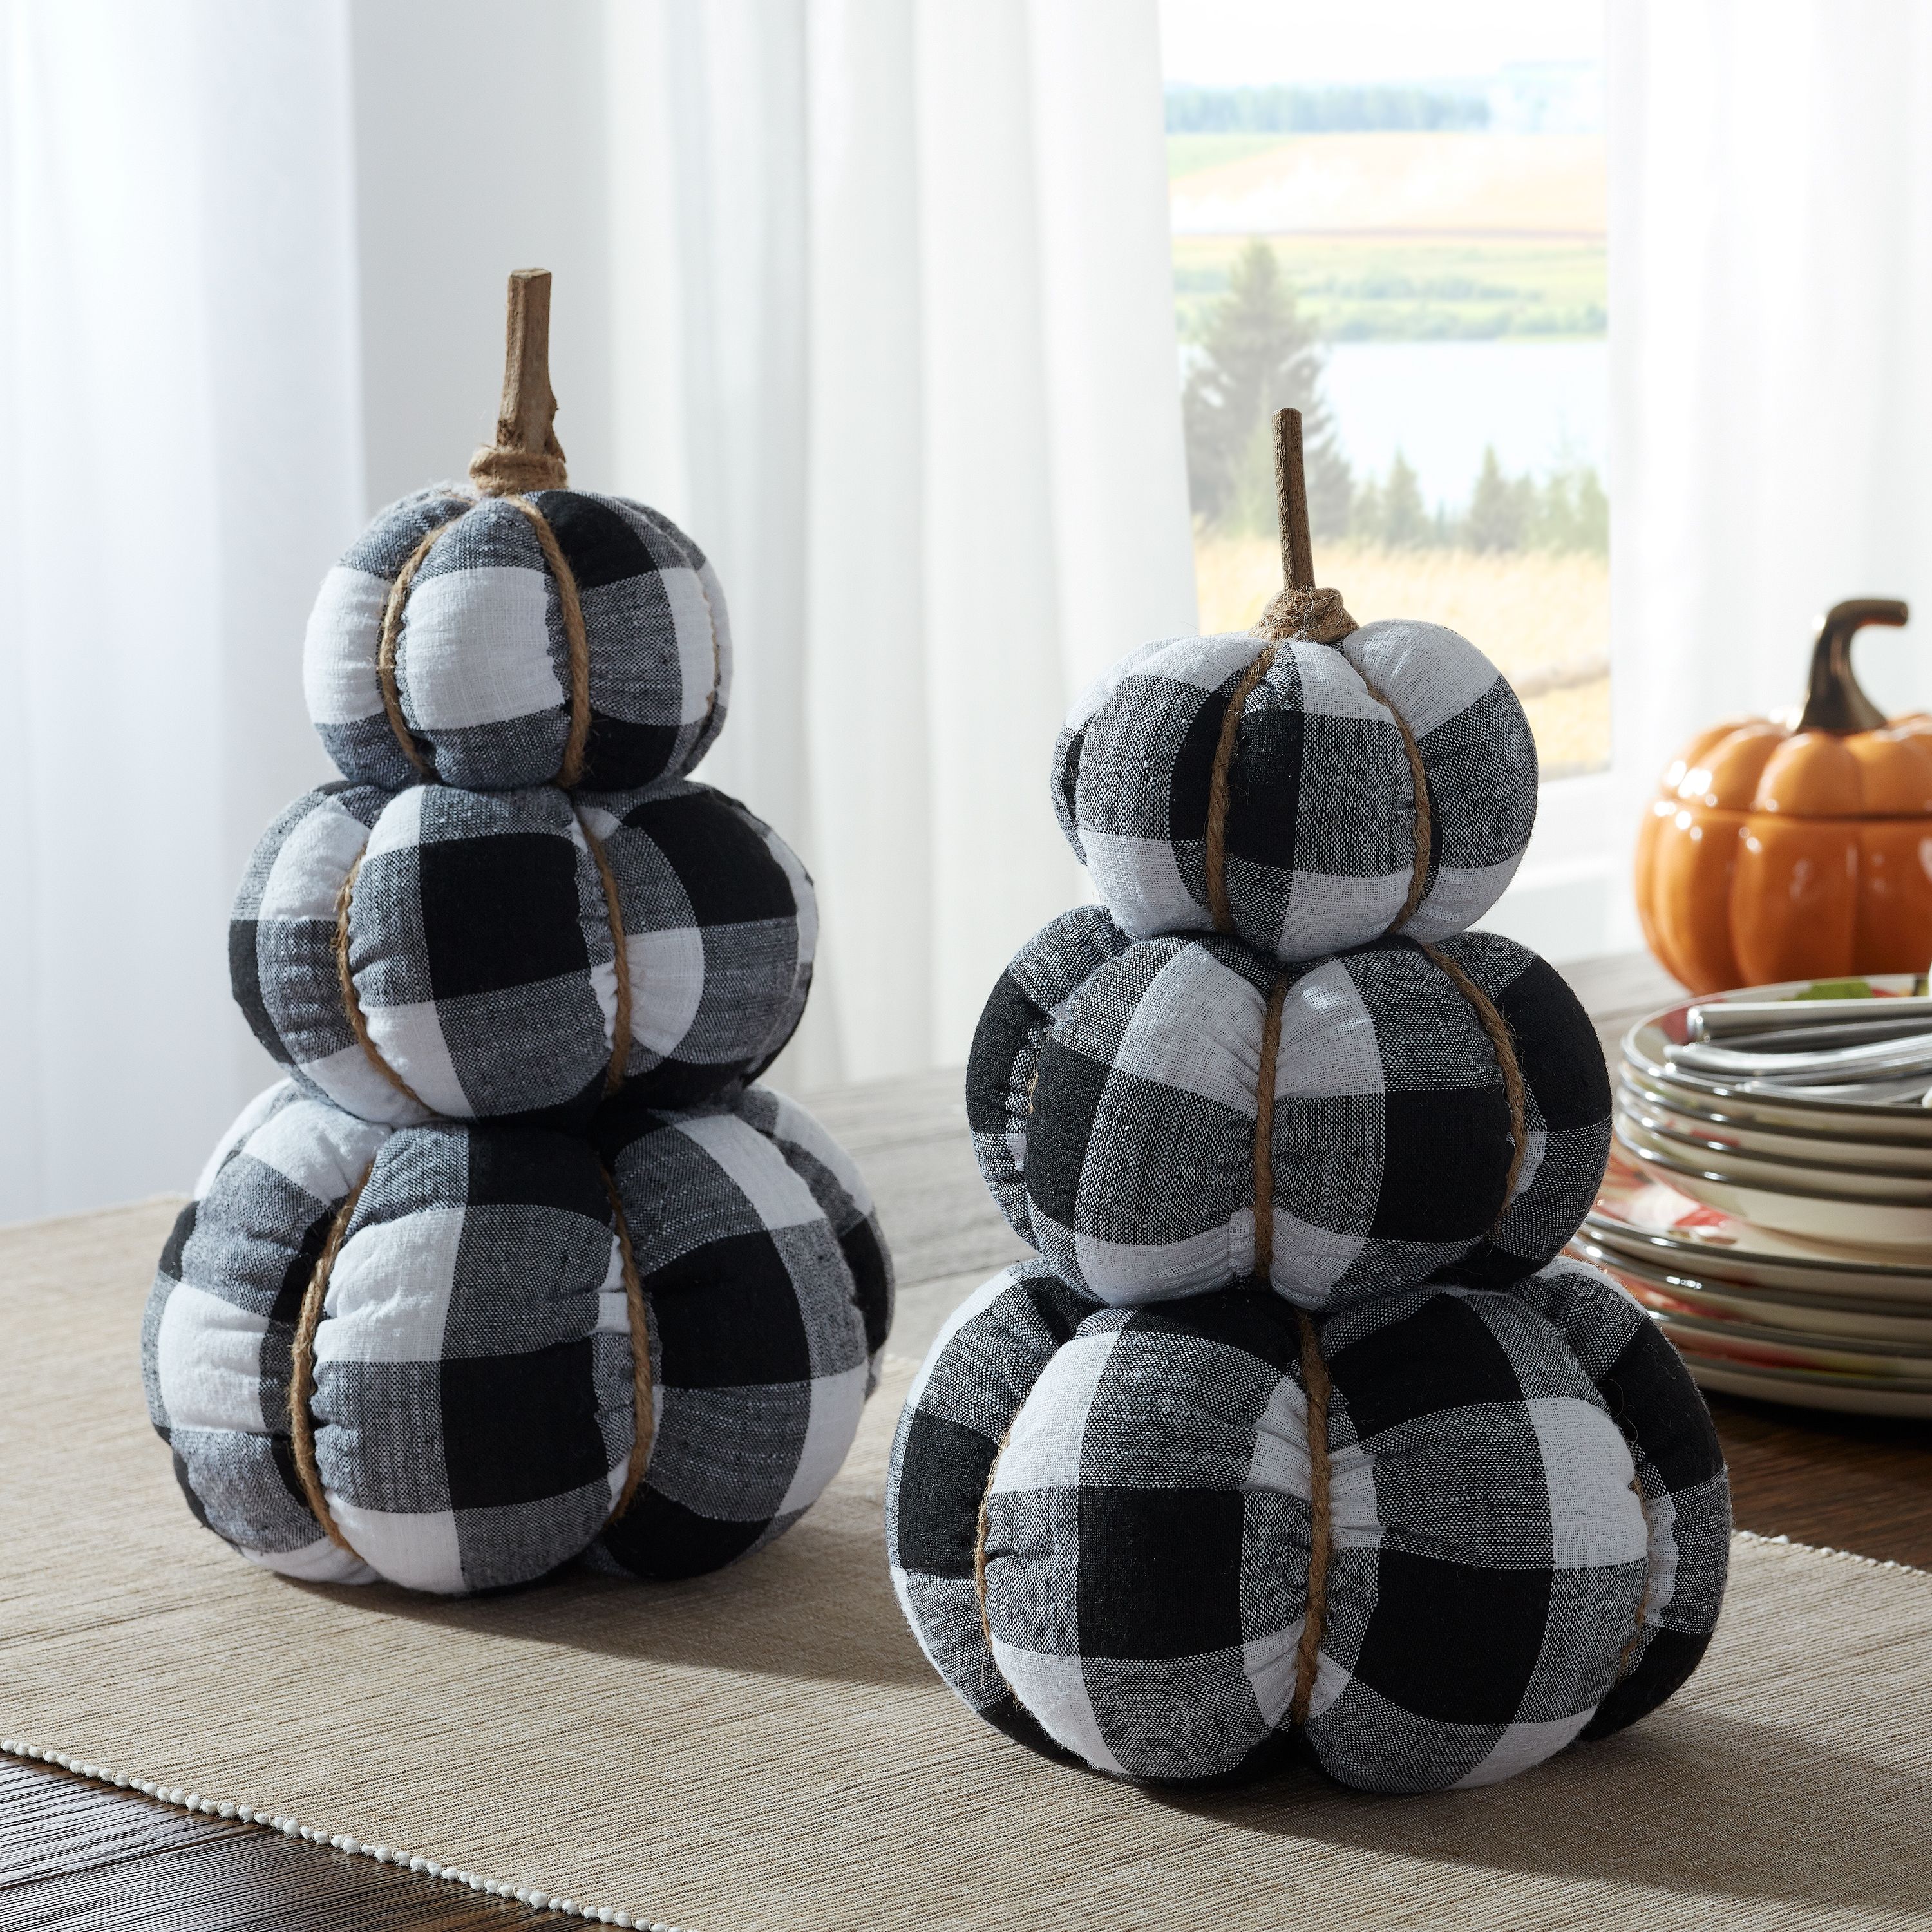 Way To Celebrate Harvest Plaid Stacked Fabric Pumpkins, Black, 2 Count - image 1 of 4